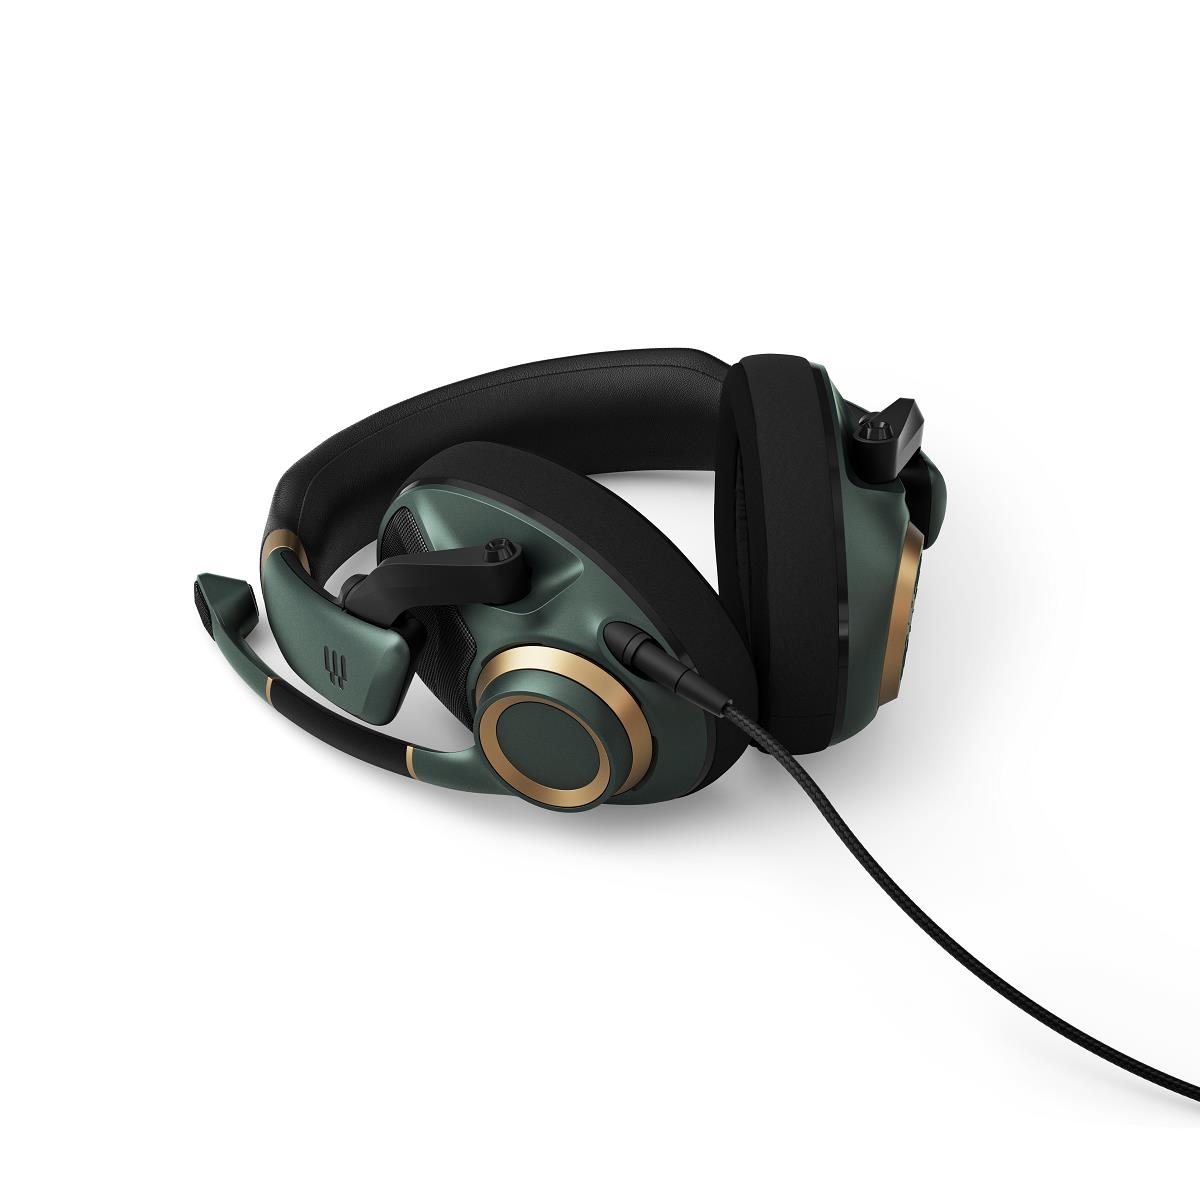 EPOS Audio H6PRO Open Acoustic Gaming Headset (Racing Green) - image 5 of 8